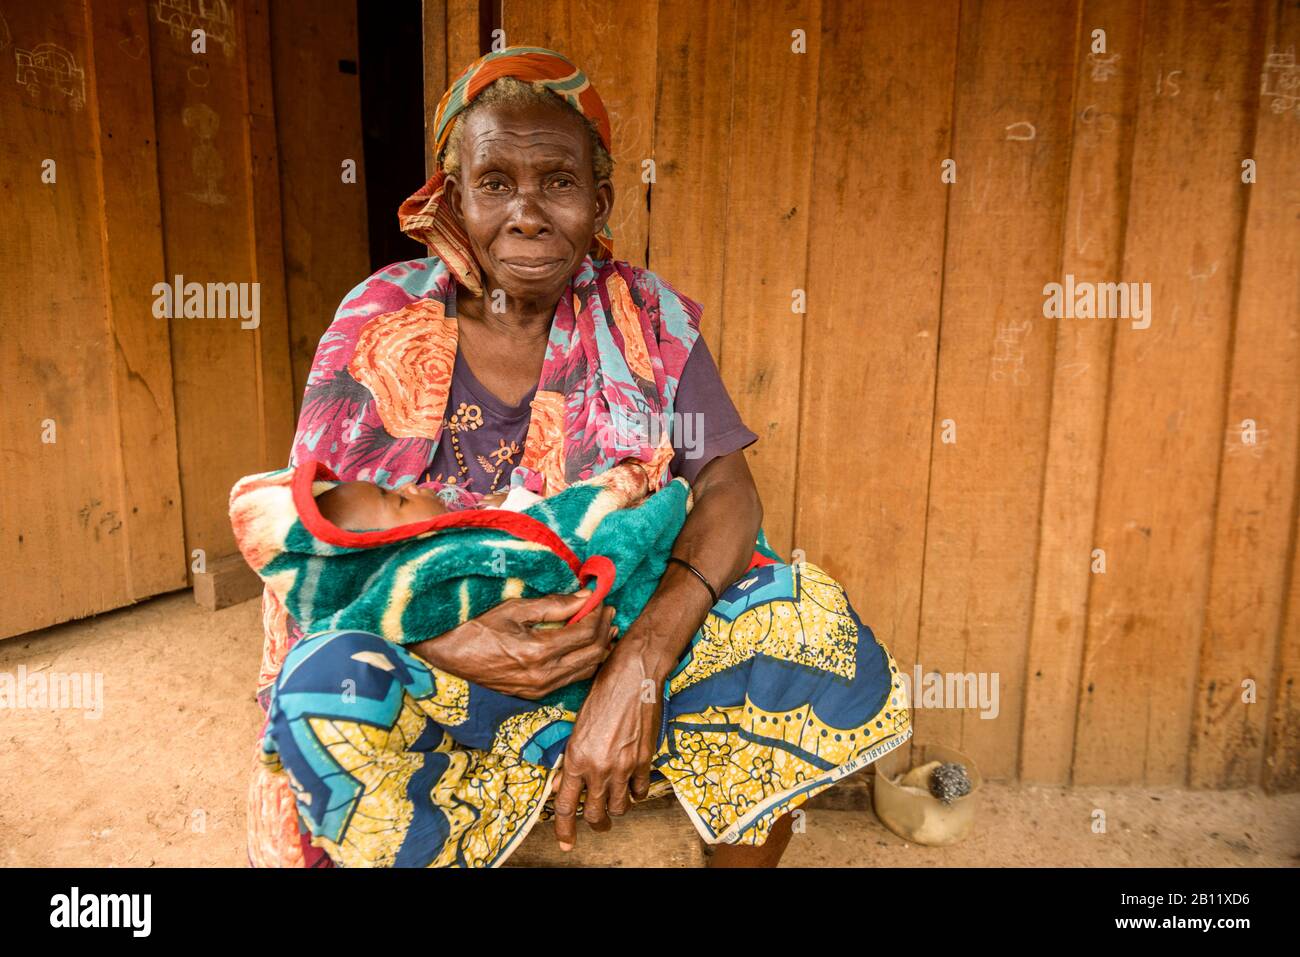 UNHCR refugee camp for the Fulani, civil war refugees from the Central African Republic, Cameroon, Africa Stock Photo